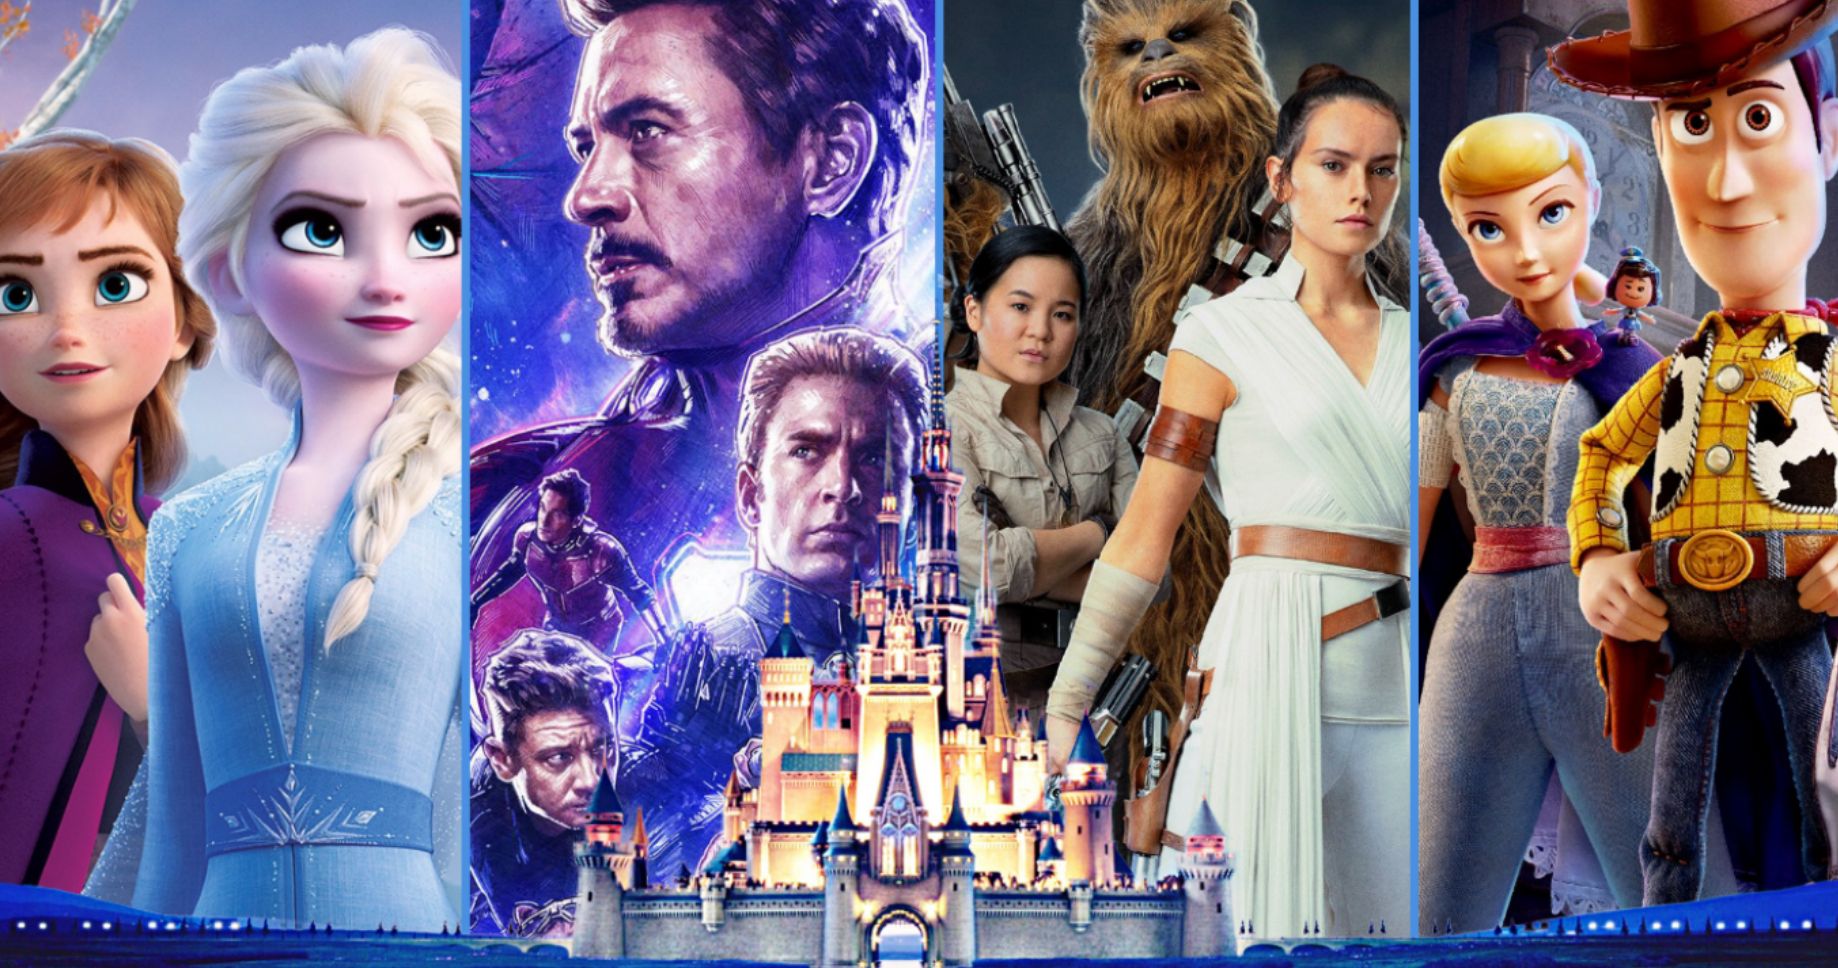 Disney Is Responsible for 80% of This Year's Top Box Office Hits